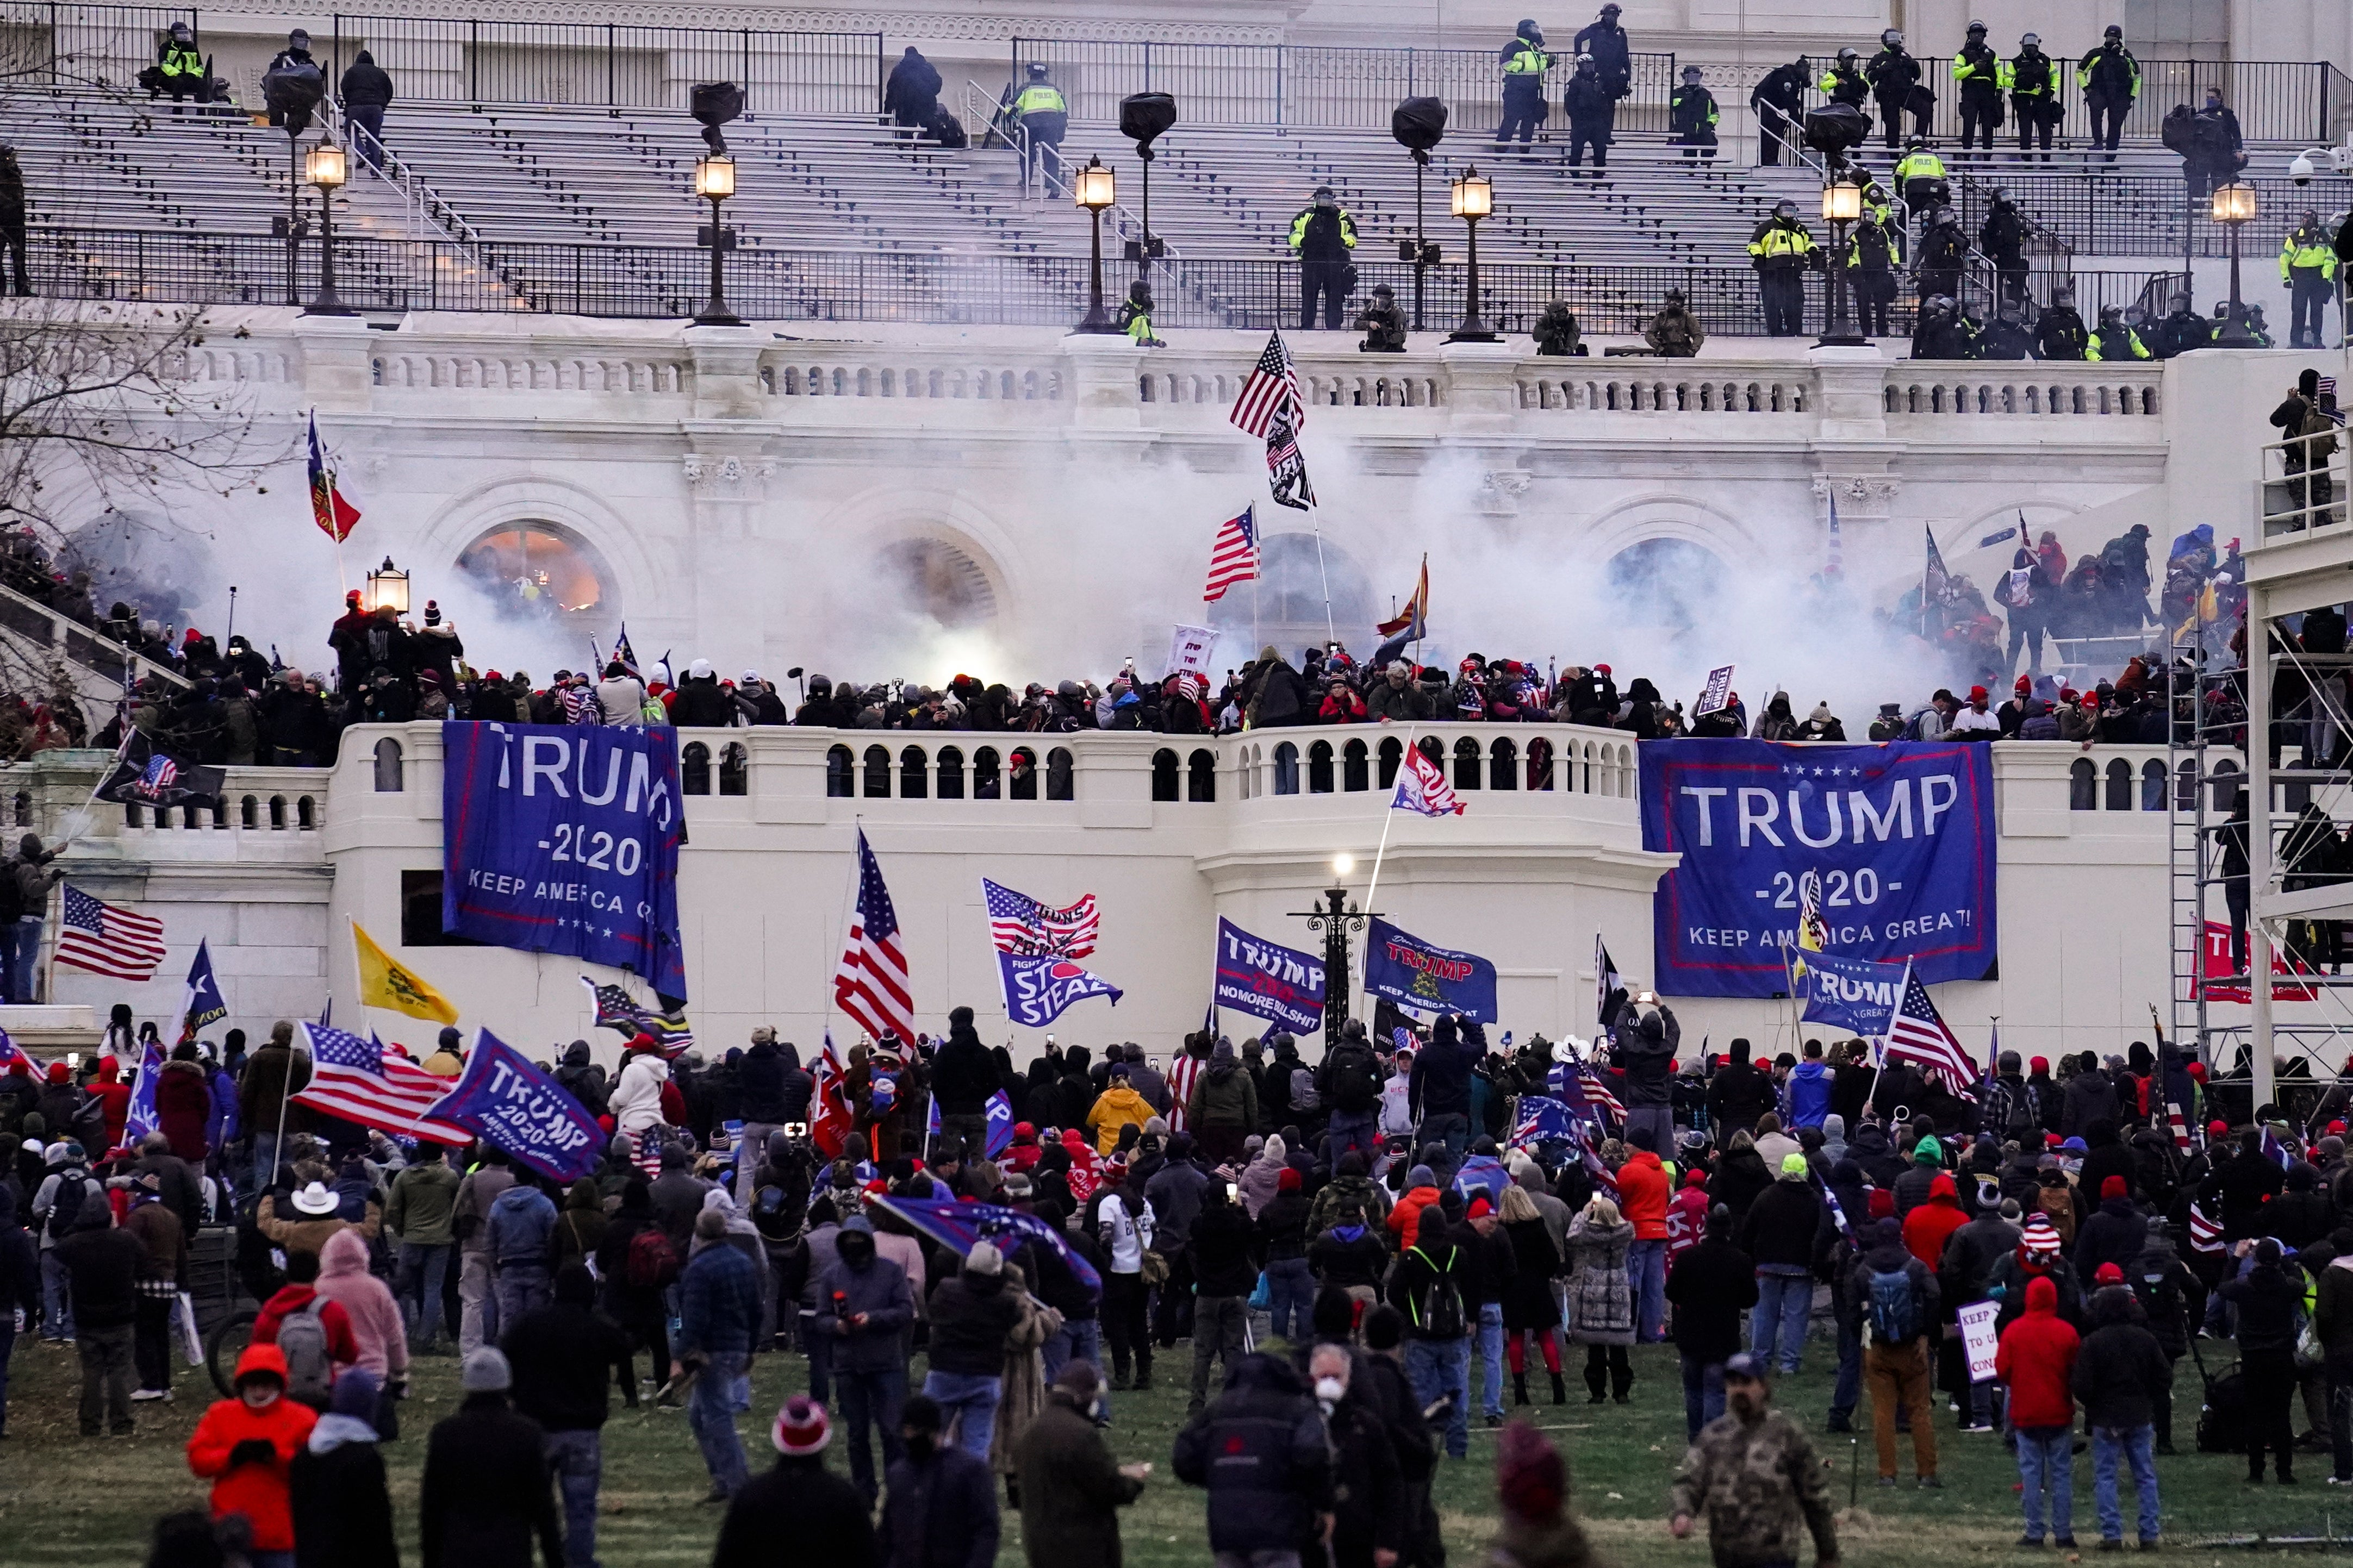 Trump supporters storming the Capitol